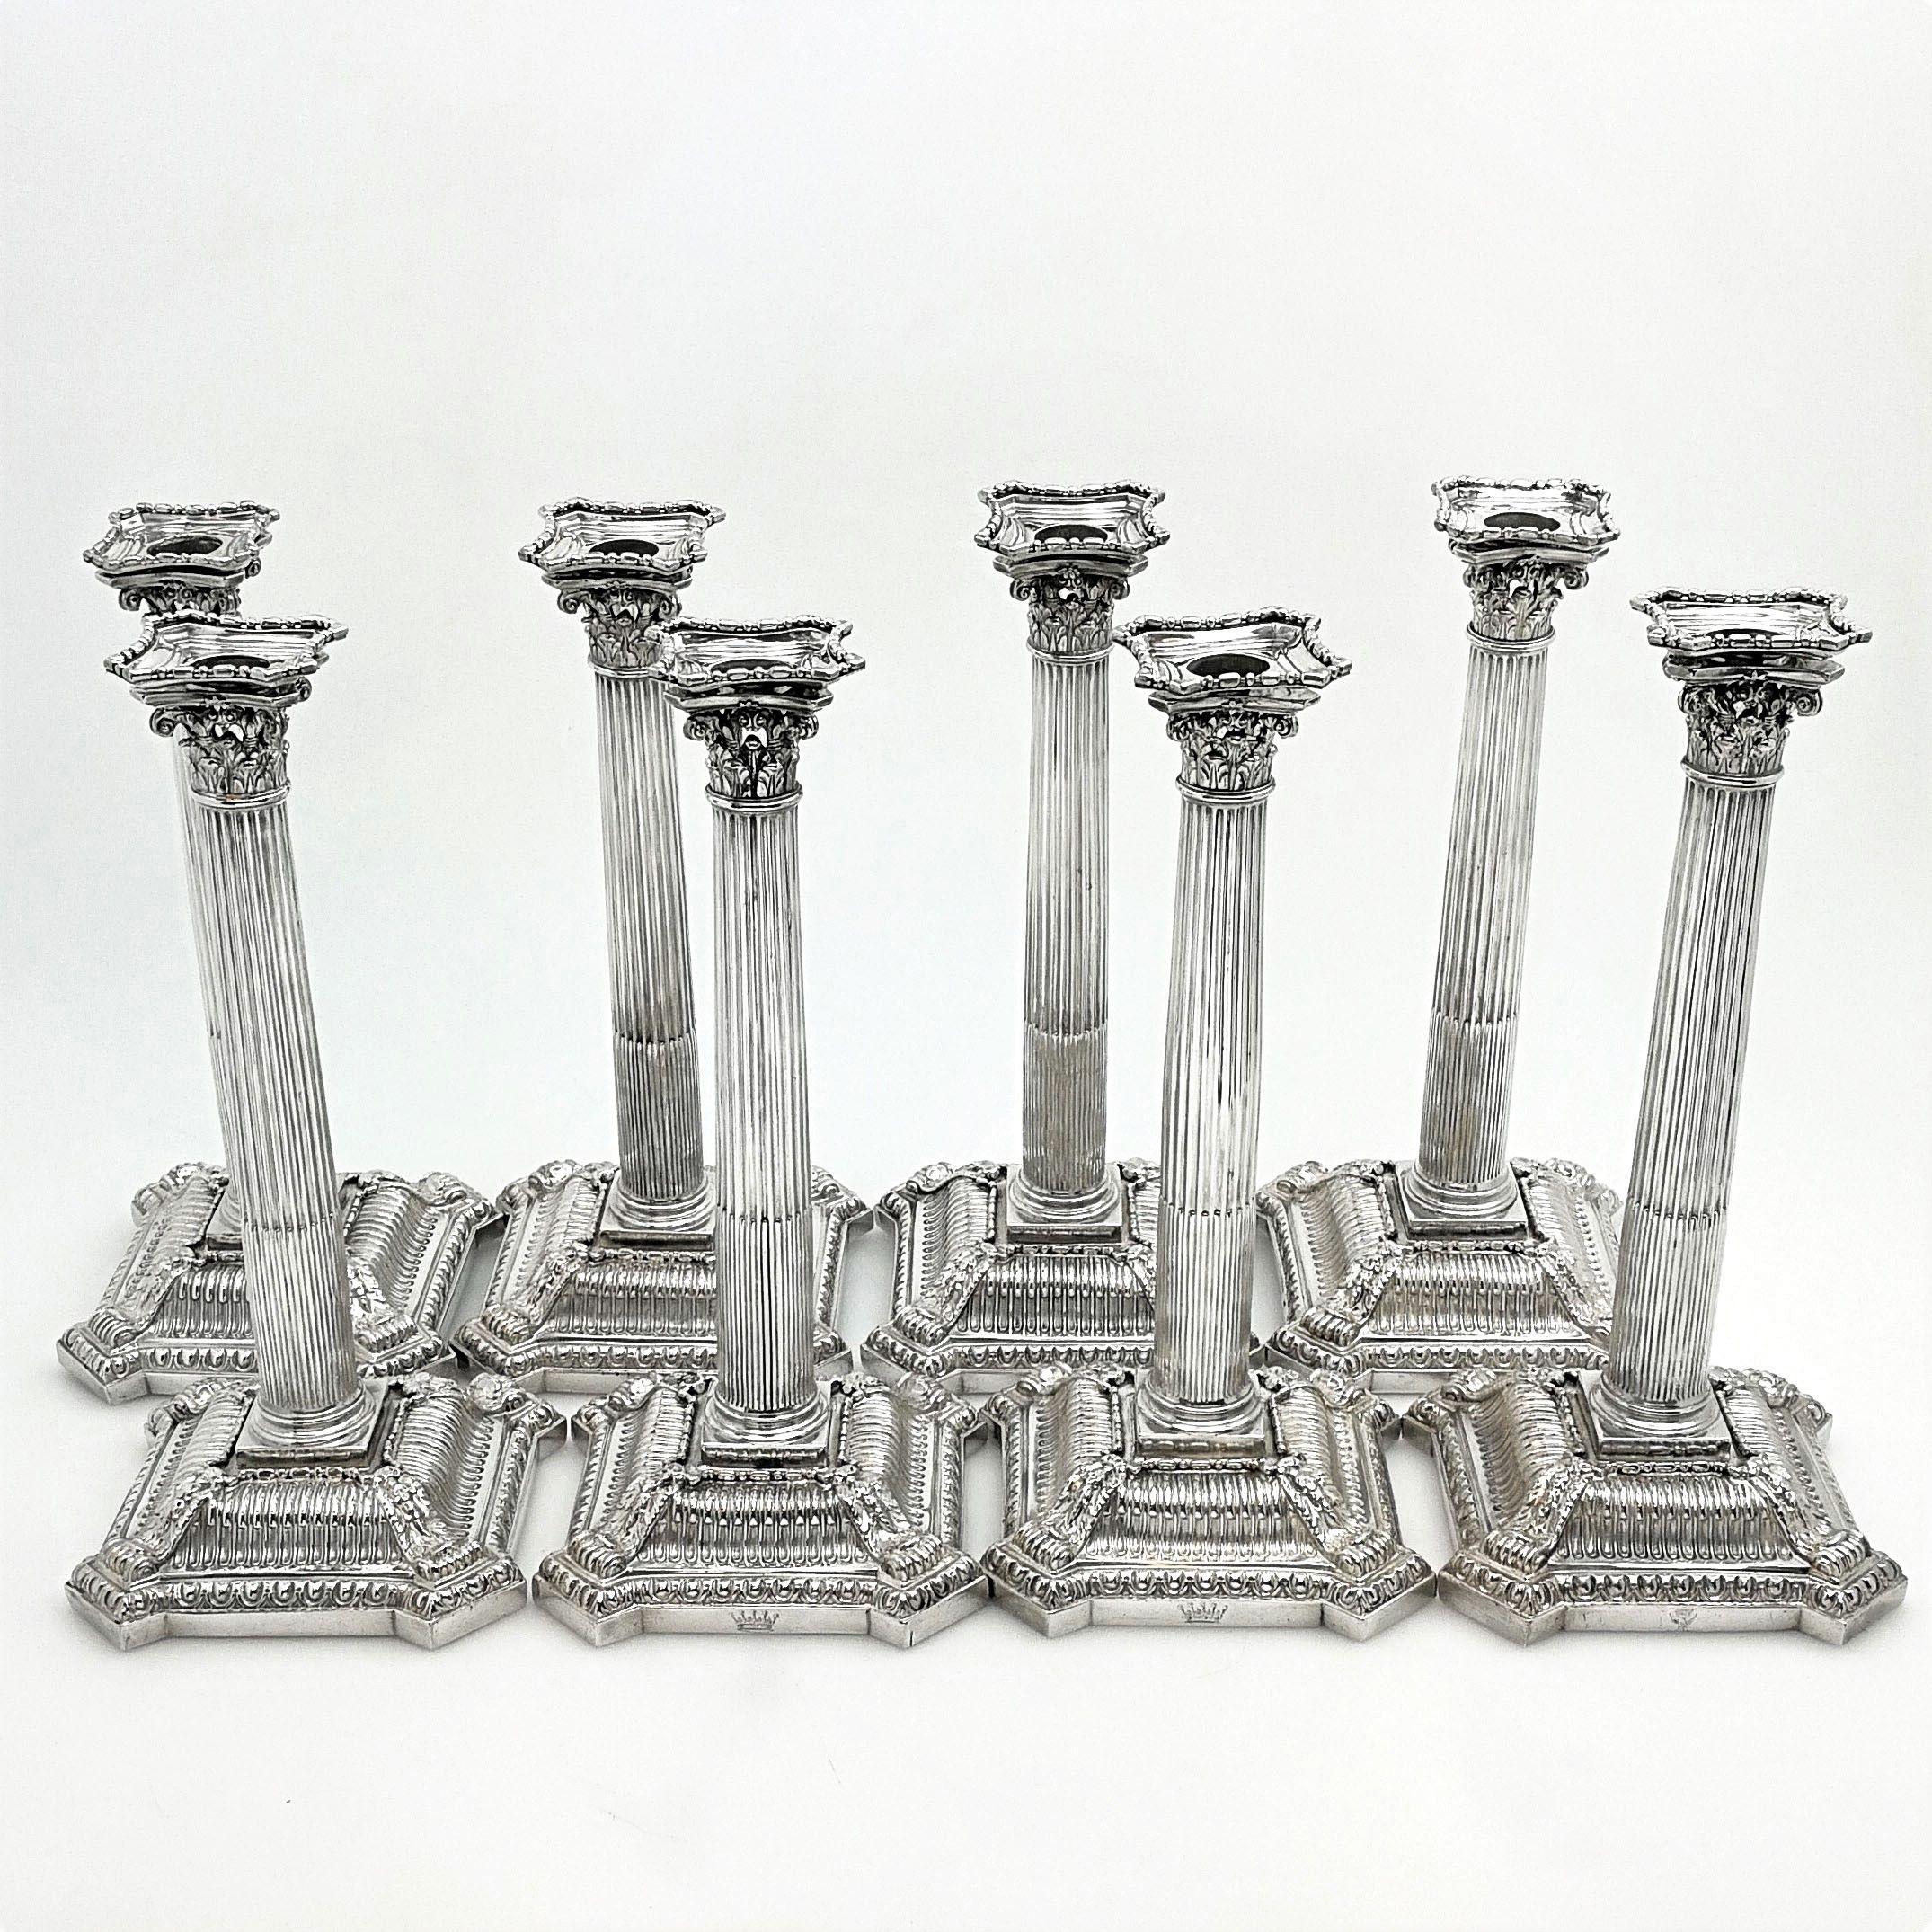 A magnificent set of 8 Antique George II Solid Silver Candlesticks. The Set features a Classic Corinthian column design with removable sconces and shaped ornate bases. 

This set is unusual in its completeness. Although large sets of candlesticks